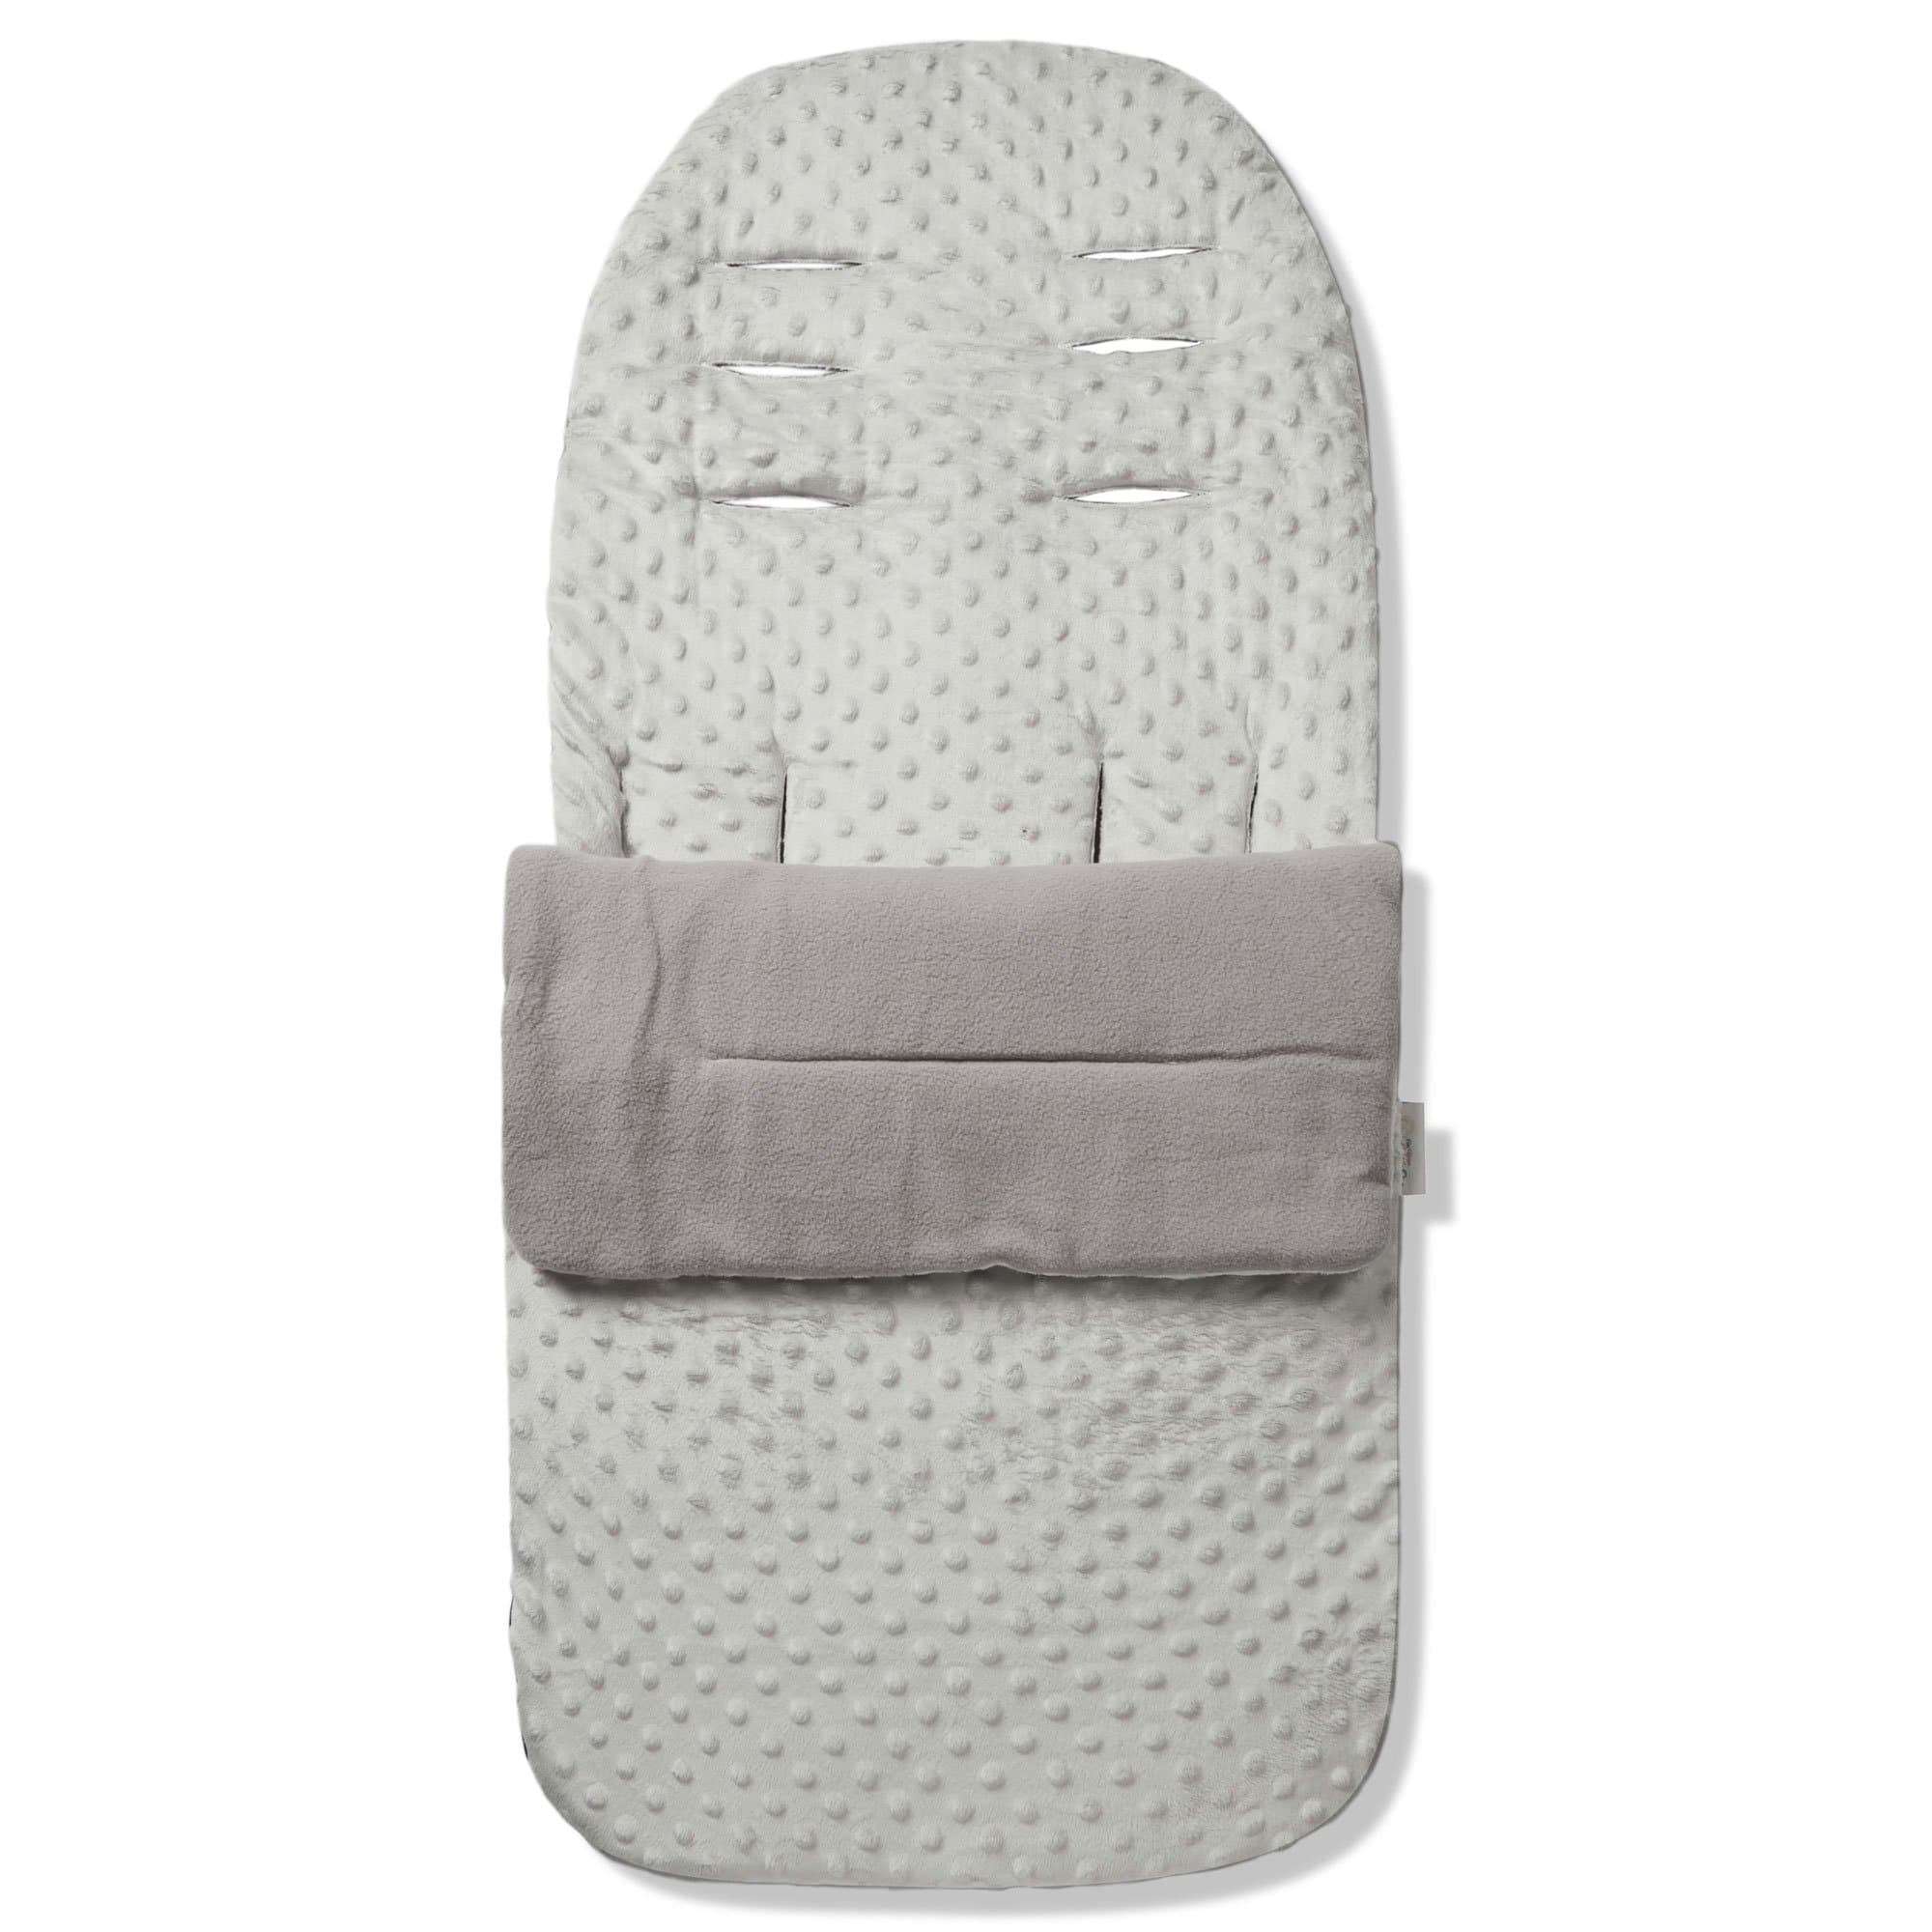 Dimple Footmuff / Cosy Toes Compatible with Nania - Grey / Fits All Models | For Your Little One